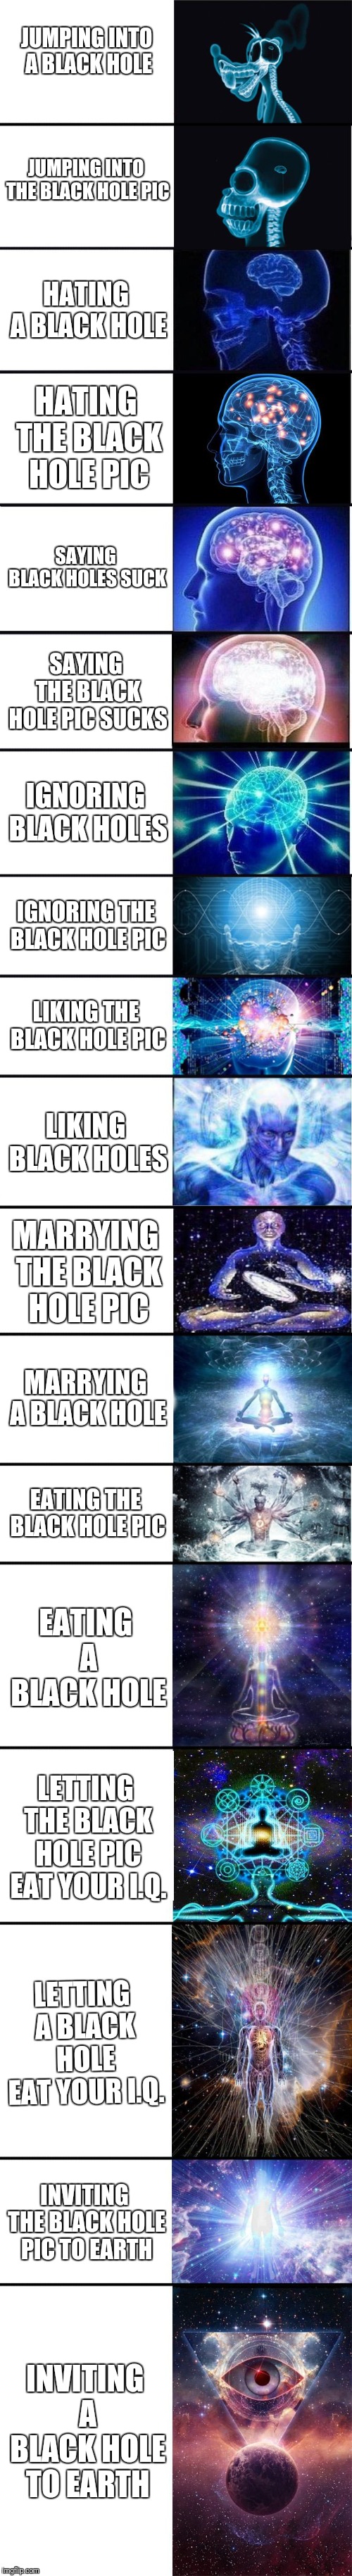 expanding brain: 9001 | JUMPING INTO A BLACK HOLE; JUMPING INTO THE BLACK HOLE PIC; HATING A BLACK HOLE; HATING THE BLACK HOLE PIC; SAYING BLACK HOLES SUCK; SAYING THE BLACK HOLE PIC SUCKS; IGNORING BLACK HOLES; IGNORING THE BLACK HOLE PIC; LIKING THE BLACK HOLE PIC; LIKING BLACK HOLES; MARRYING THE BLACK HOLE PIC; MARRYING A BLACK HOLE; EATING THE BLACK HOLE PIC; EATING A BLACK HOLE; LETTING THE BLACK HOLE PIC EAT YOUR I.Q. LETTING A BLACK HOLE EAT YOUR I.Q. INVITING THE BLACK HOLE PIC TO EARTH; INVITING A BLACK HOLE TO EARTH | image tagged in expanding brain 9001 | made w/ Imgflip meme maker